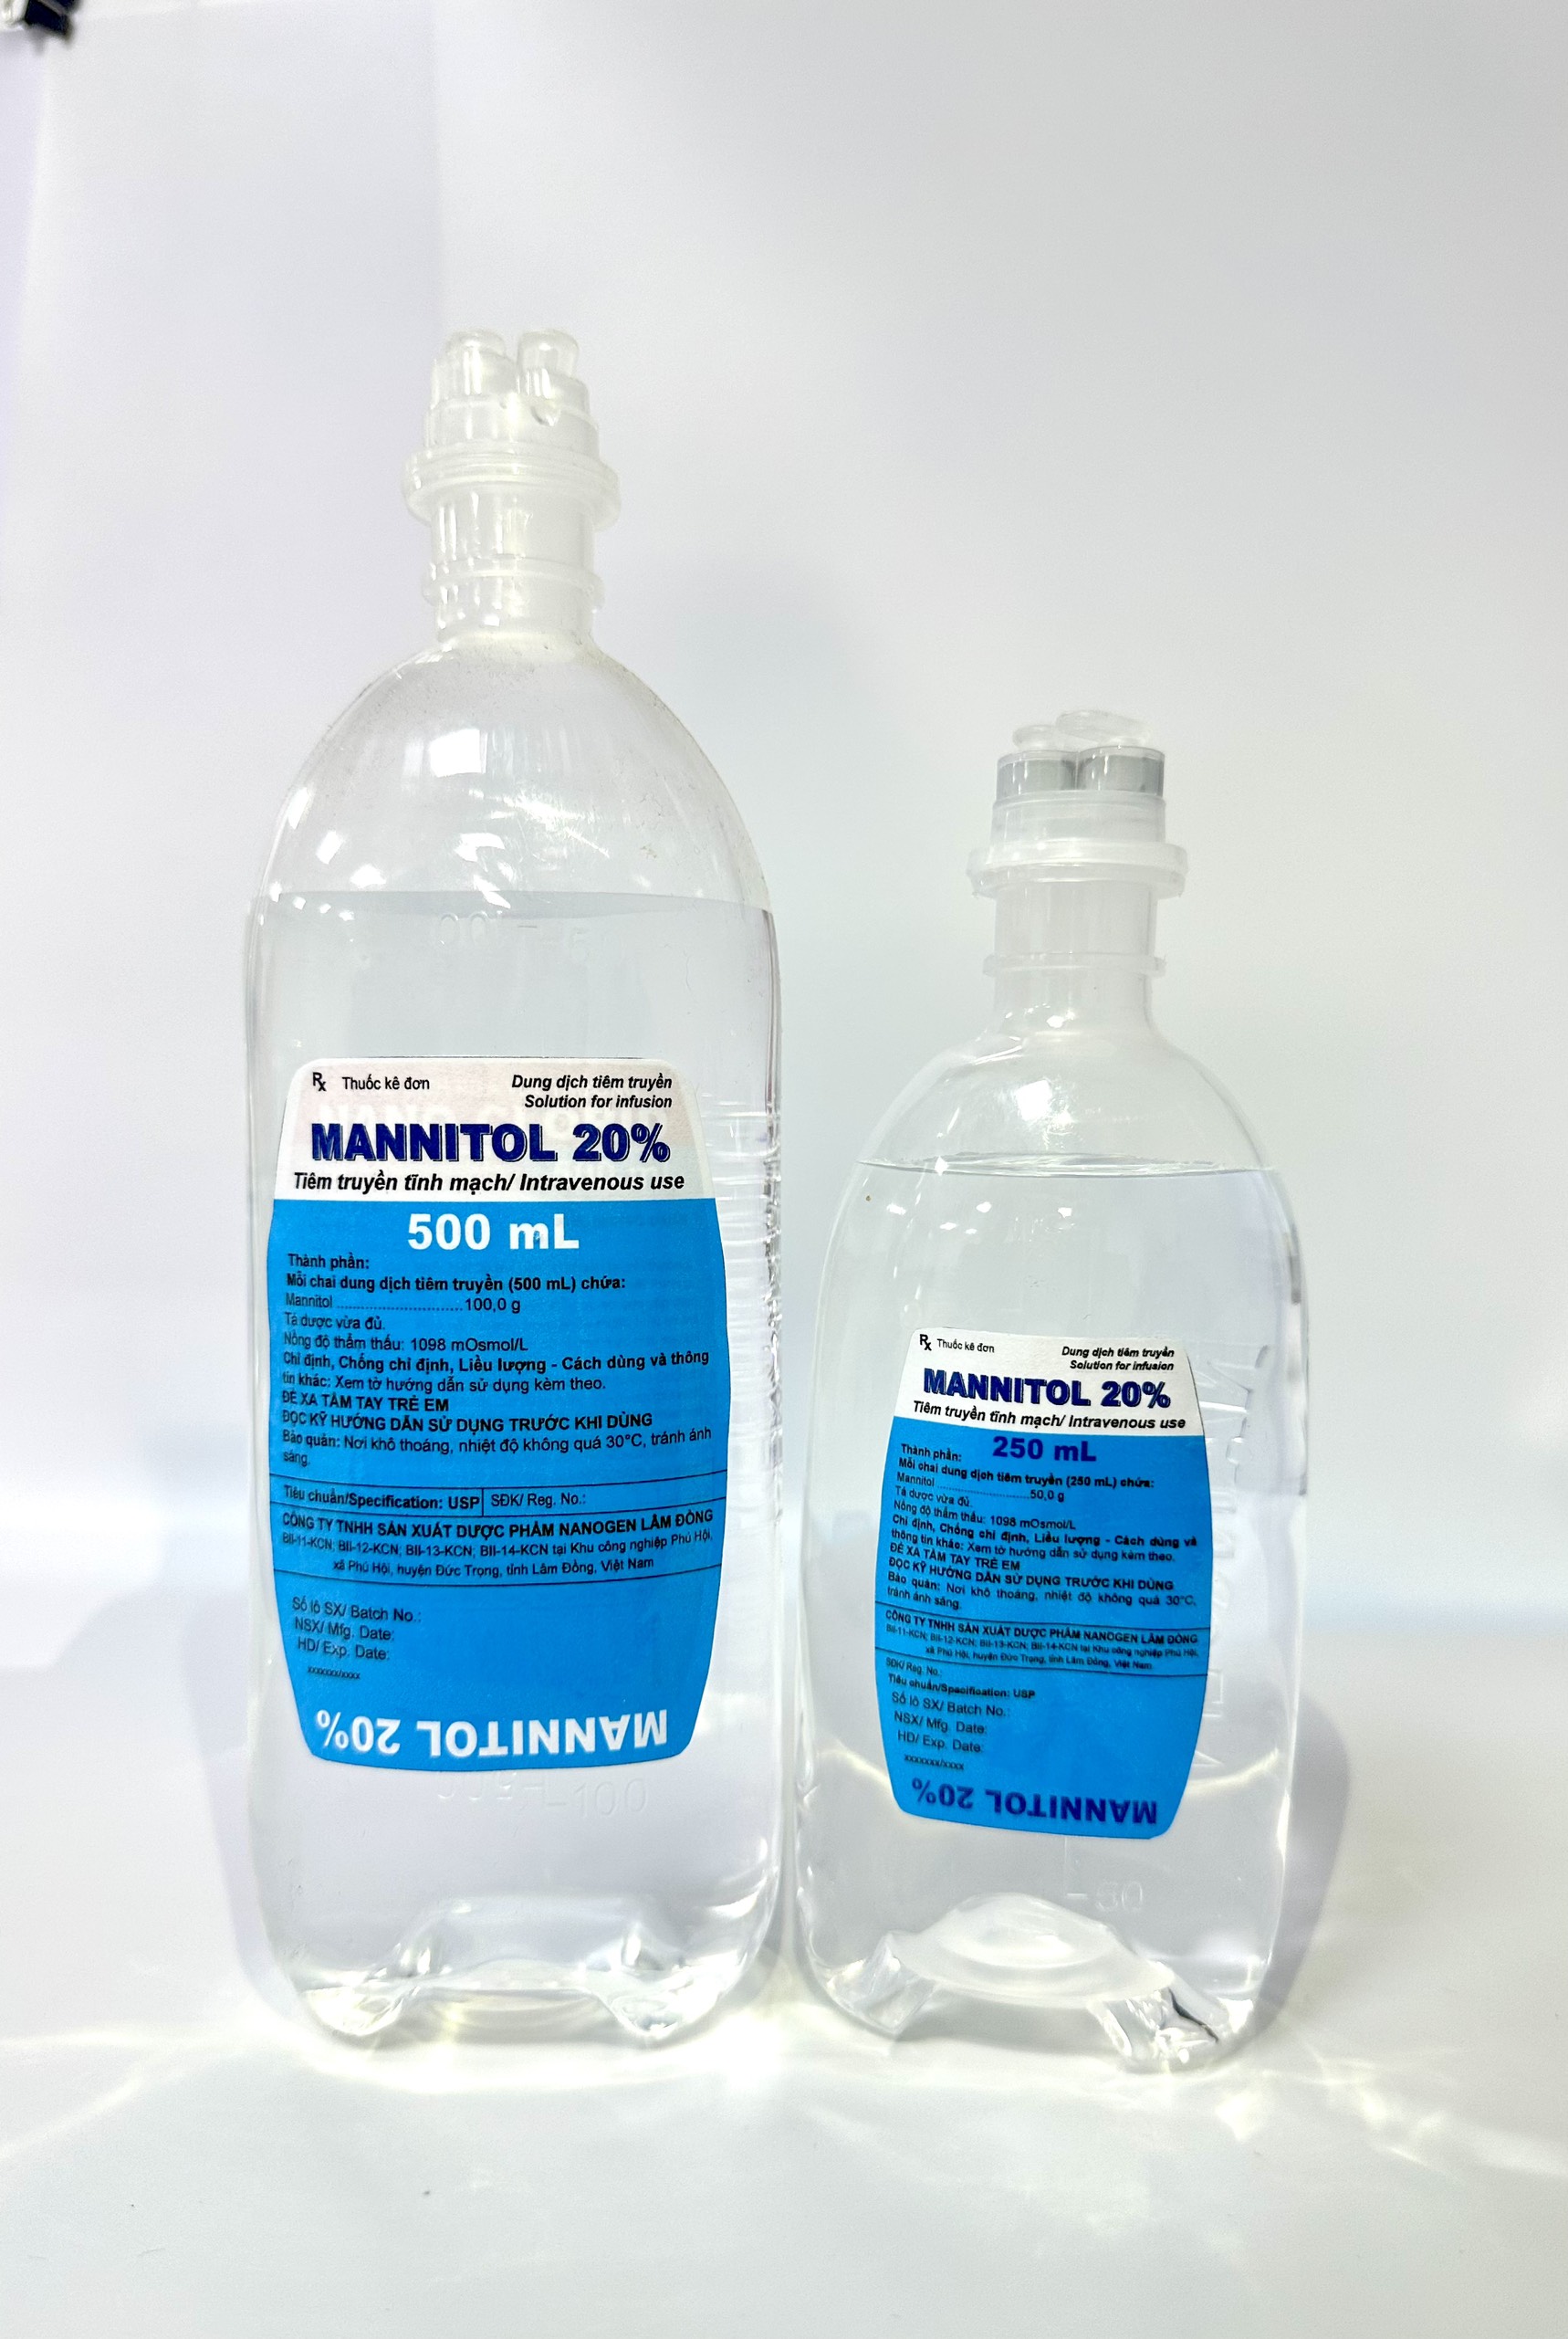 MANNITOL 20%